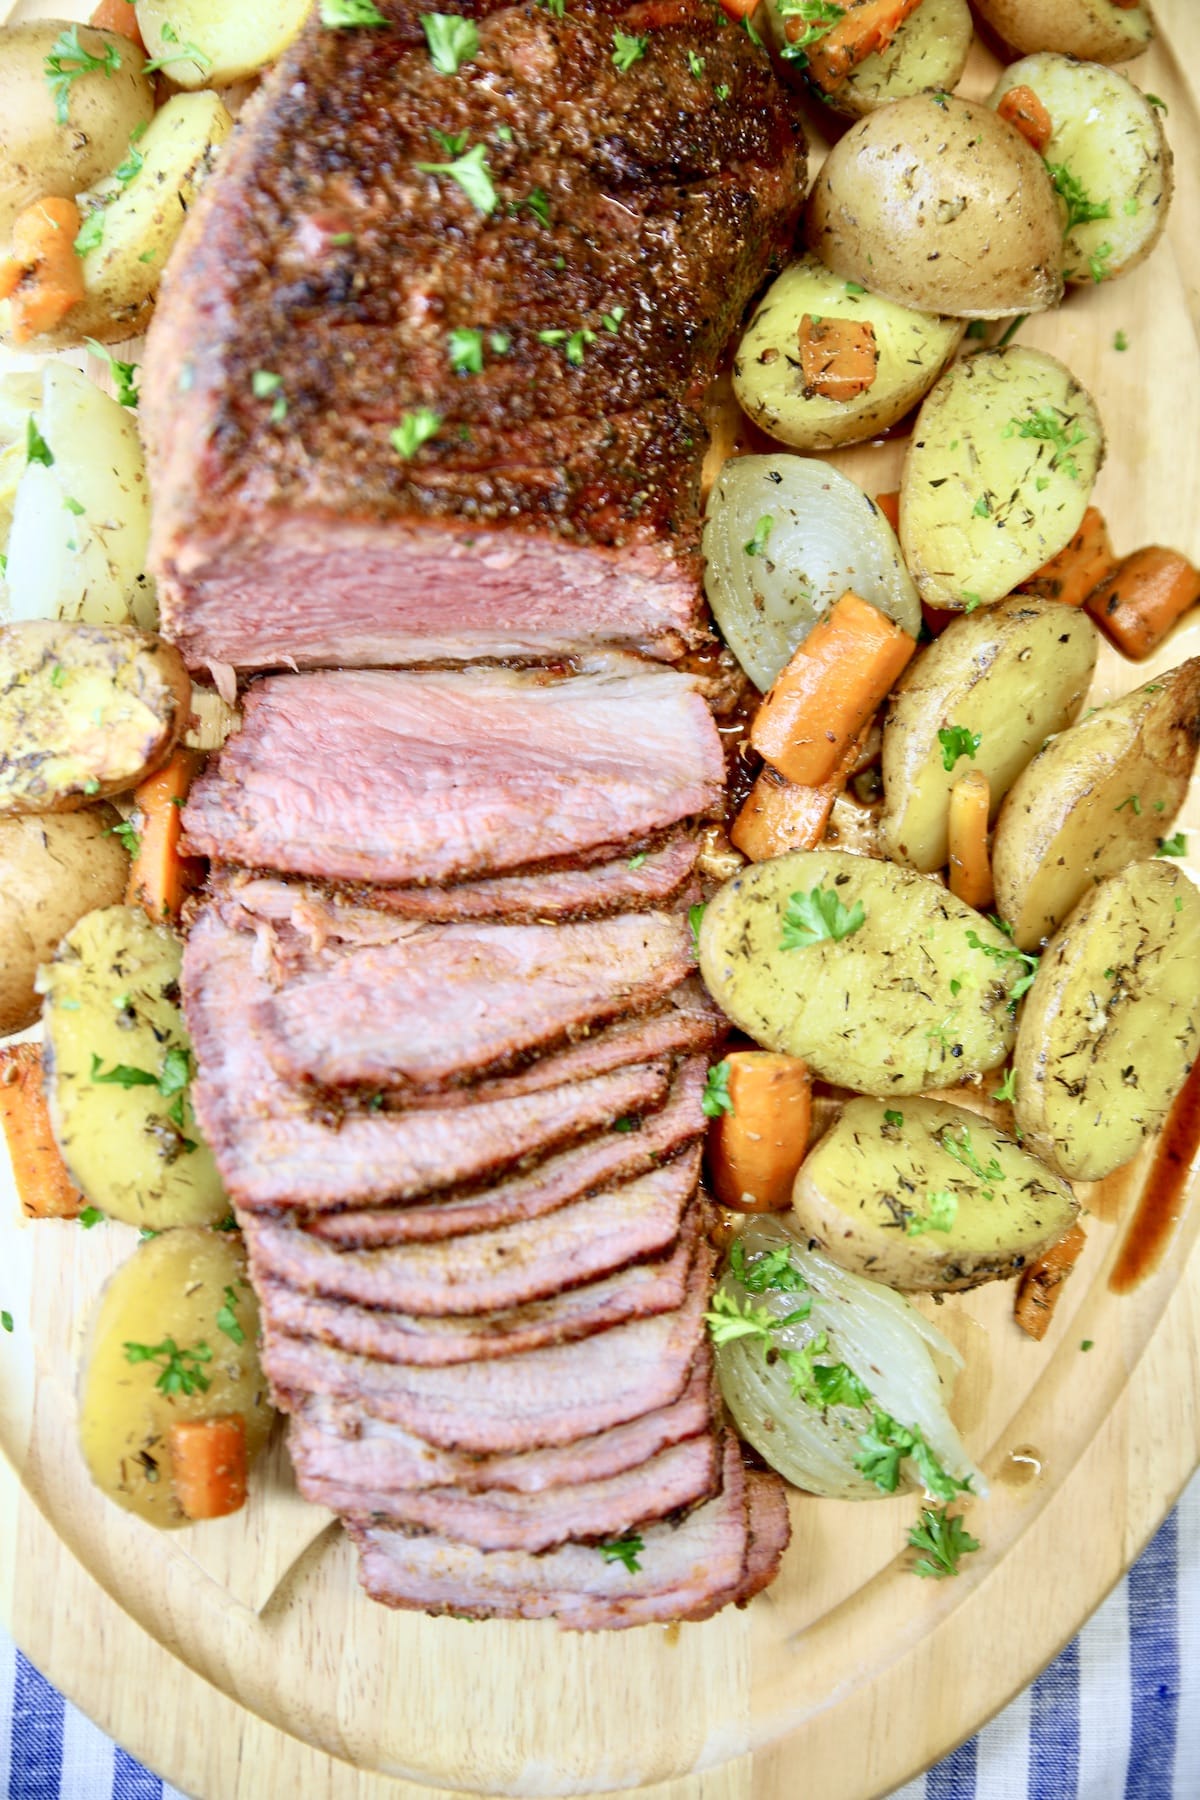 Platter of Roast beef and vegetables.